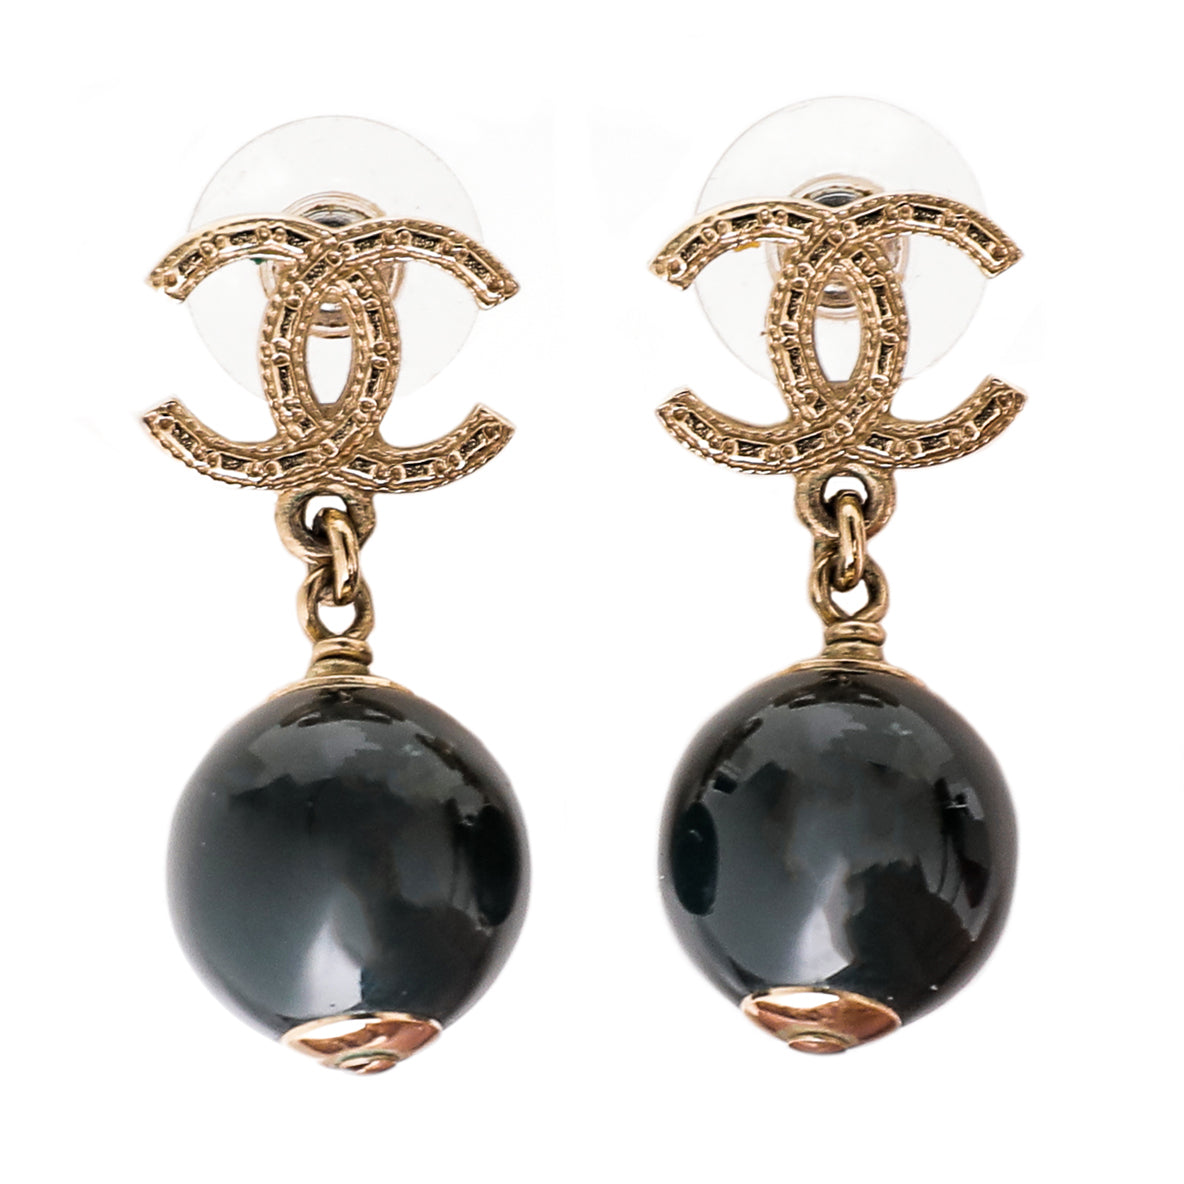 Chanel CC Pearl Earrings Chanel | The Luxury Closet